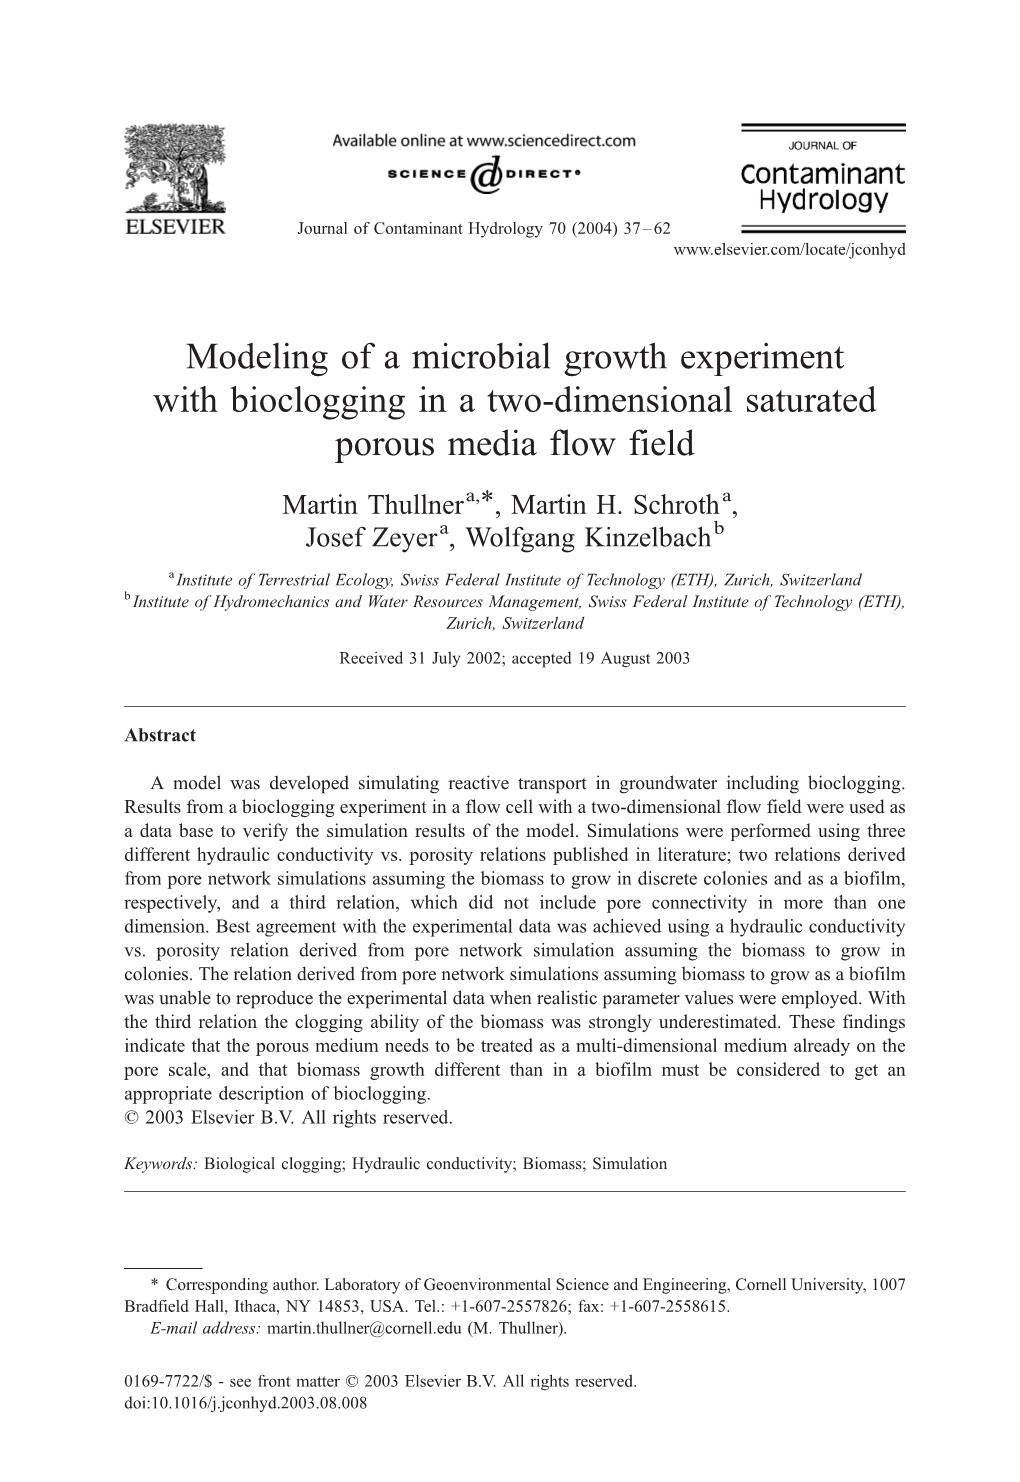 Modeling of a Microbial Growth Experiment with Bioclogging in a Two-Dimensional Saturated Porous Media Flow Field